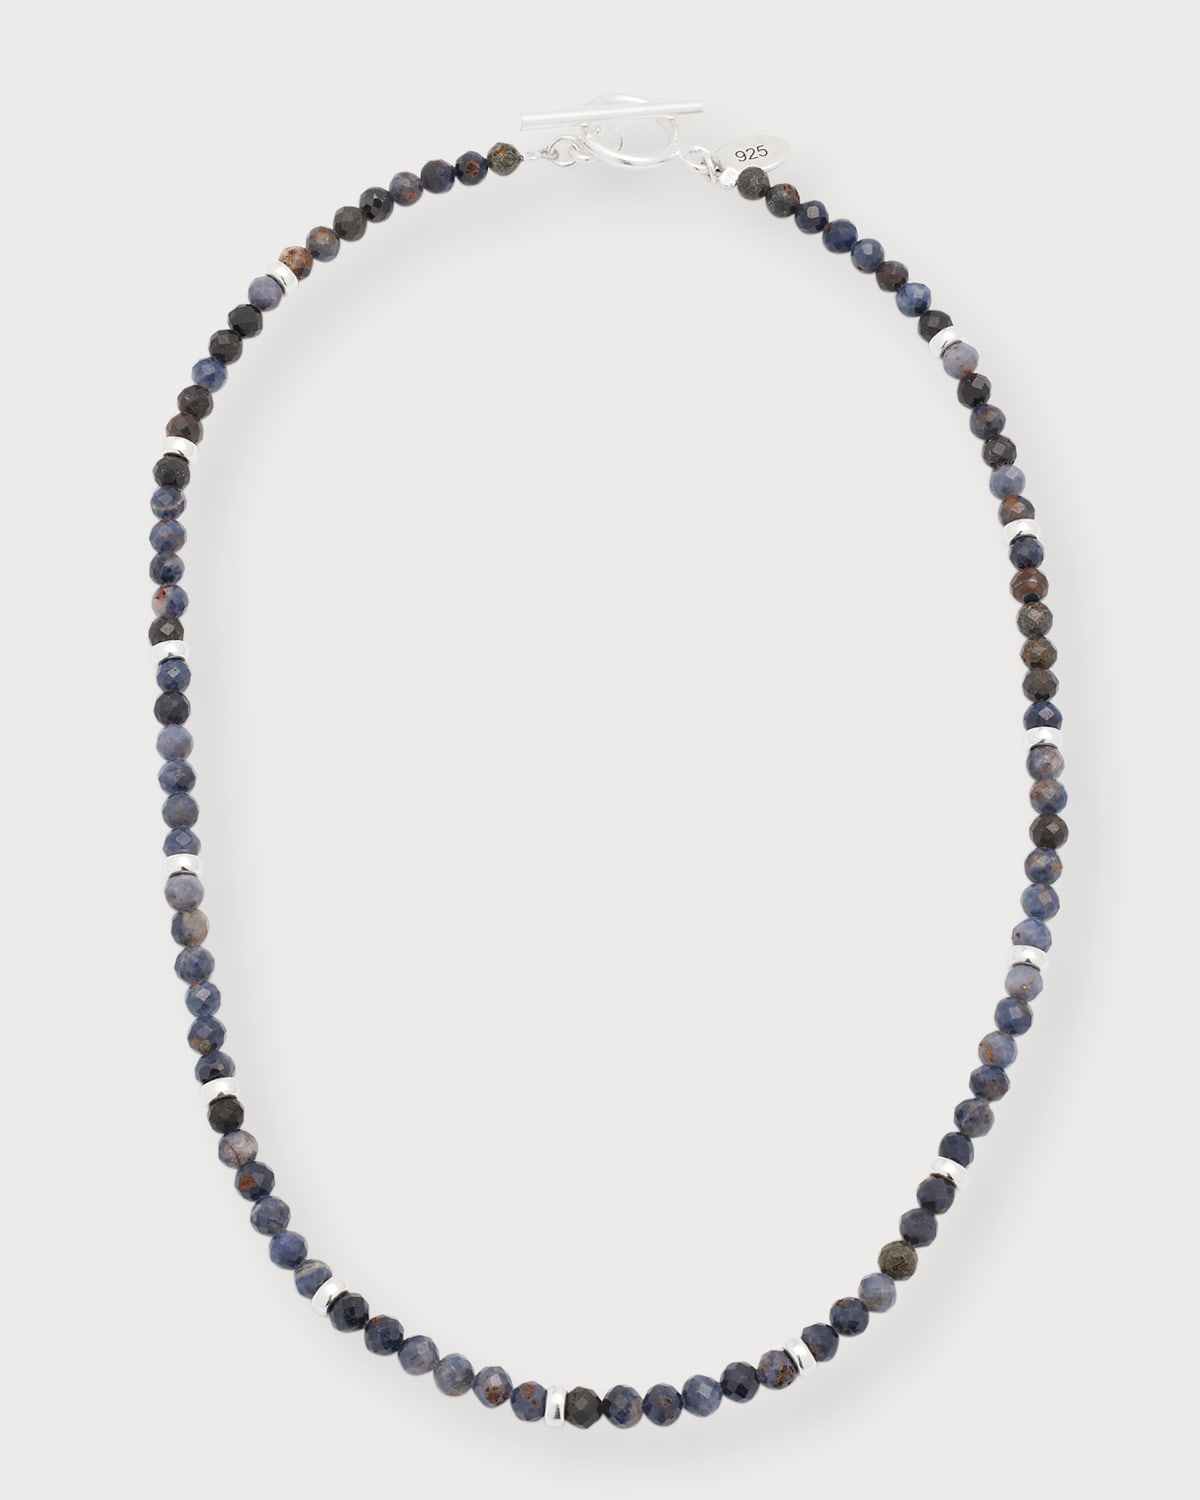 JAN LESLIE MEN'S STERLING SILVER AND SAPPHIRE BEADED NECKLACE